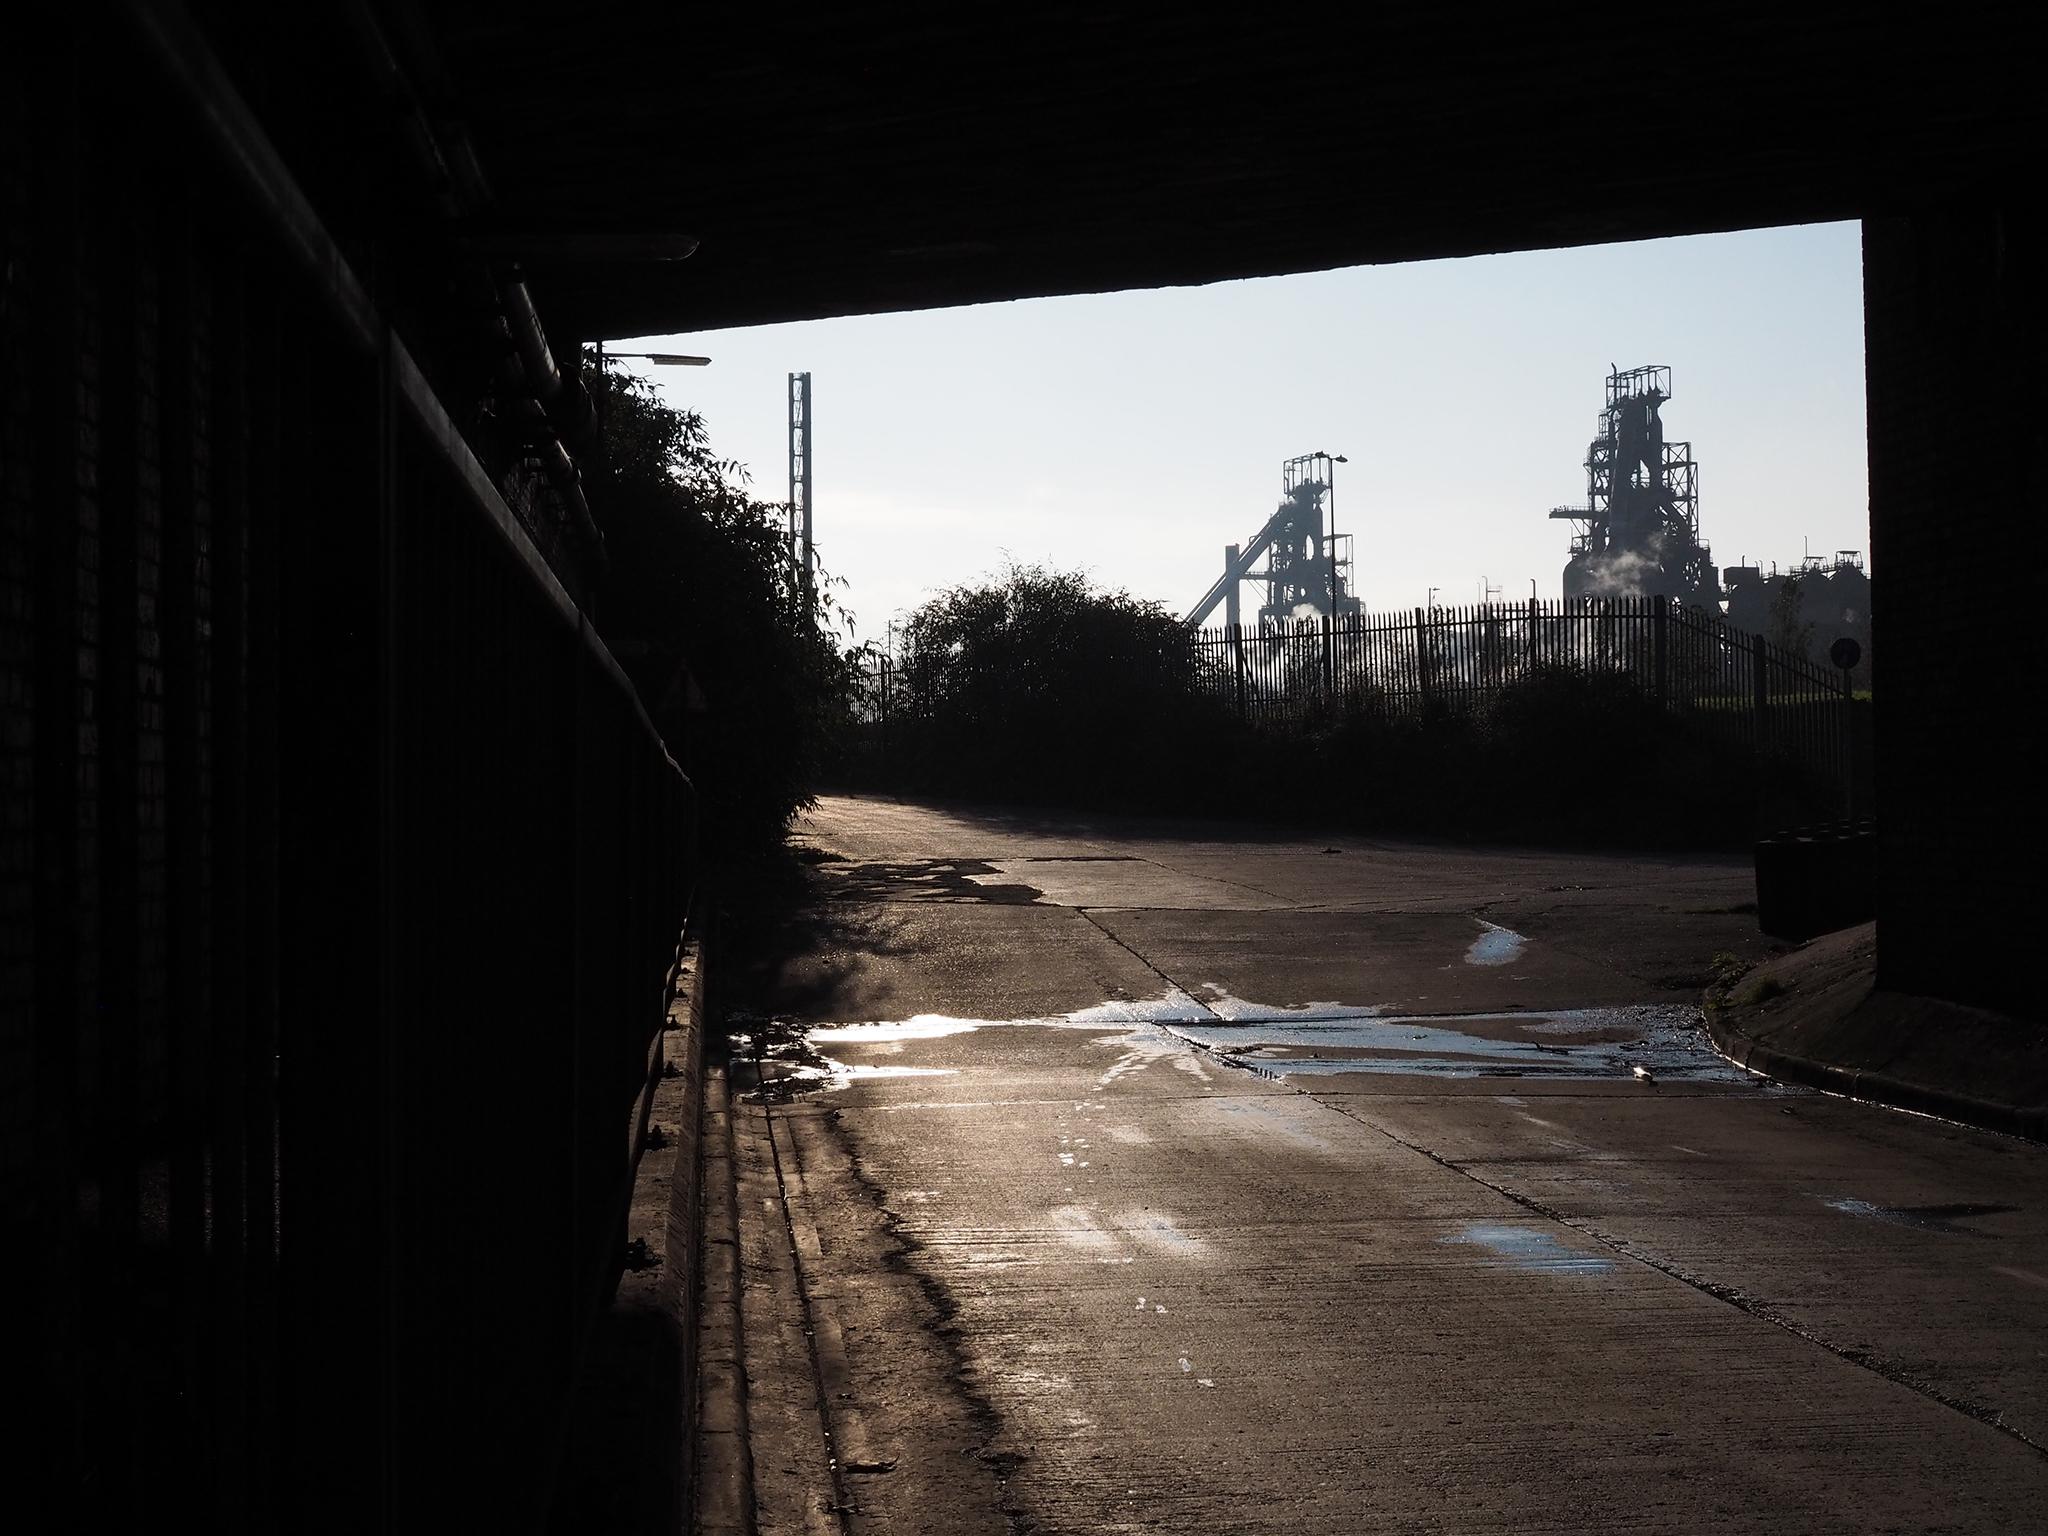 View of the Port Talbot steelworks from an underpass by the M4